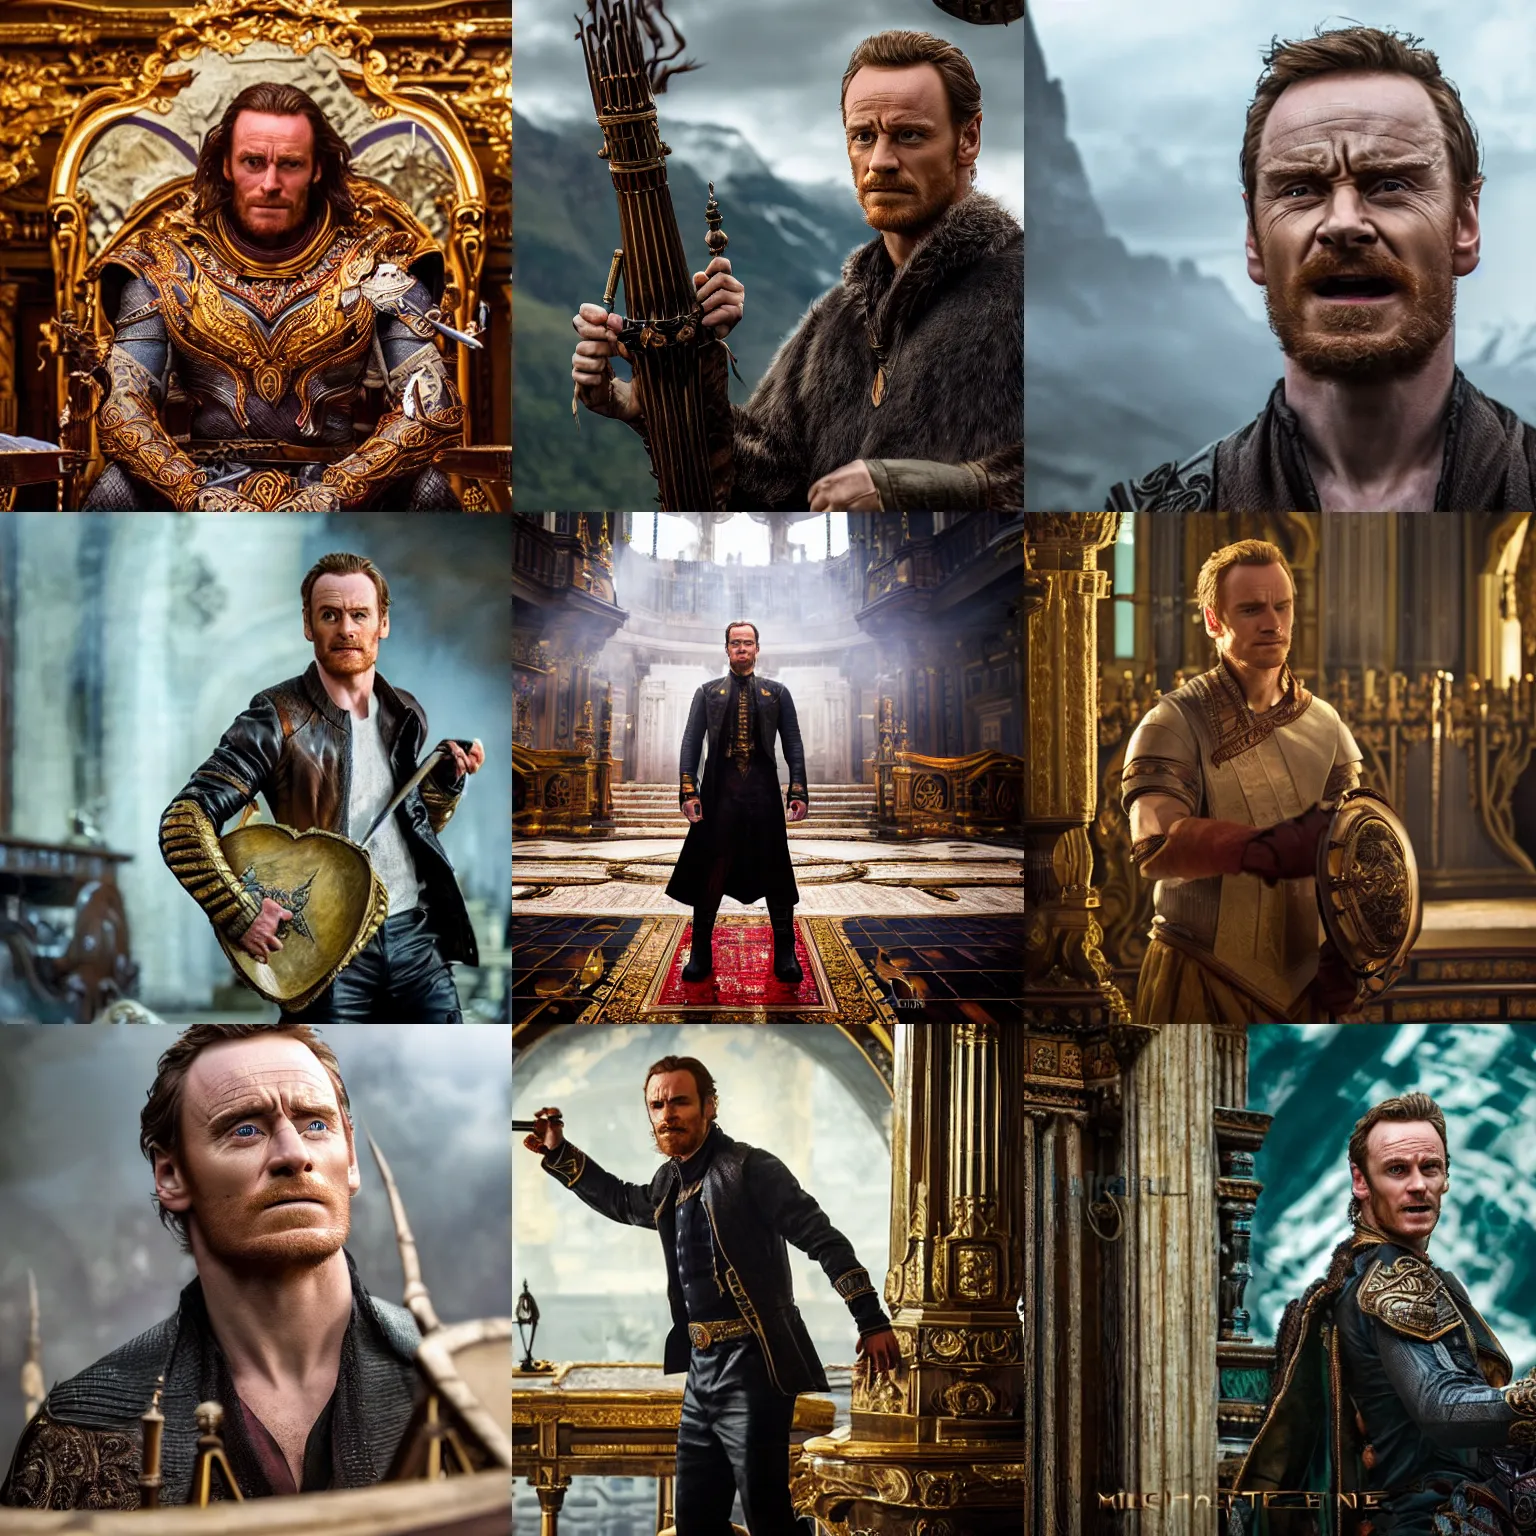 Prompt: hyper realistic photograph of Kwothe played by Michael Fassbender, 4k, Carl Zeiss, sigma, Tamron so 85mm, stunning arcanum backdrop, magic, ornate set design, cinematic, lute